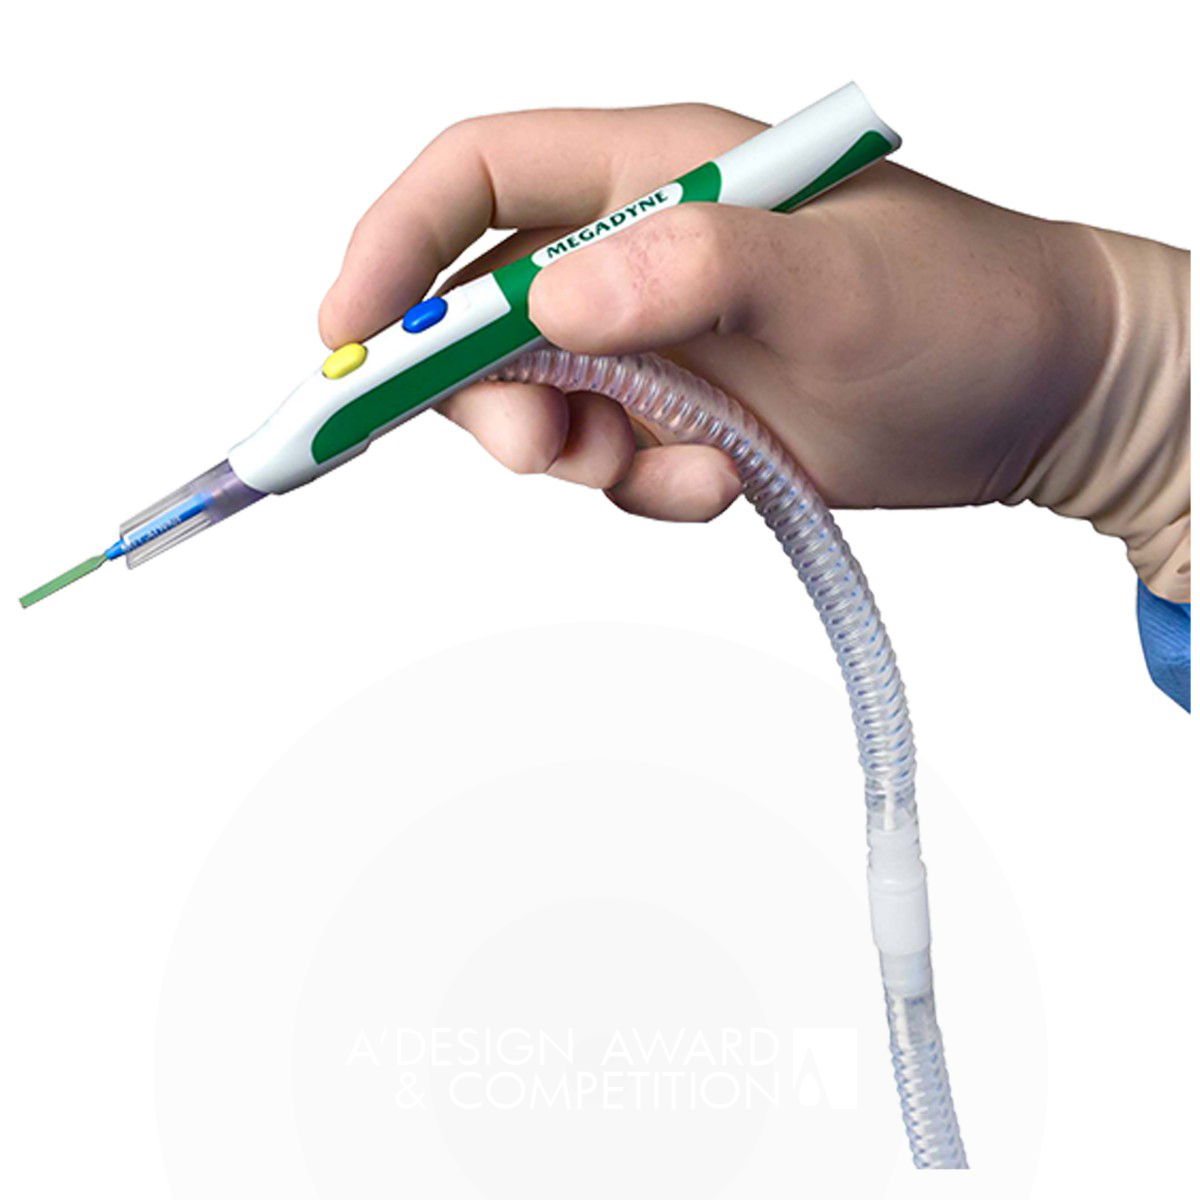 ZIP Pen Electrosurgical Smoke Evacuation Pen by Megadyne Medical Products